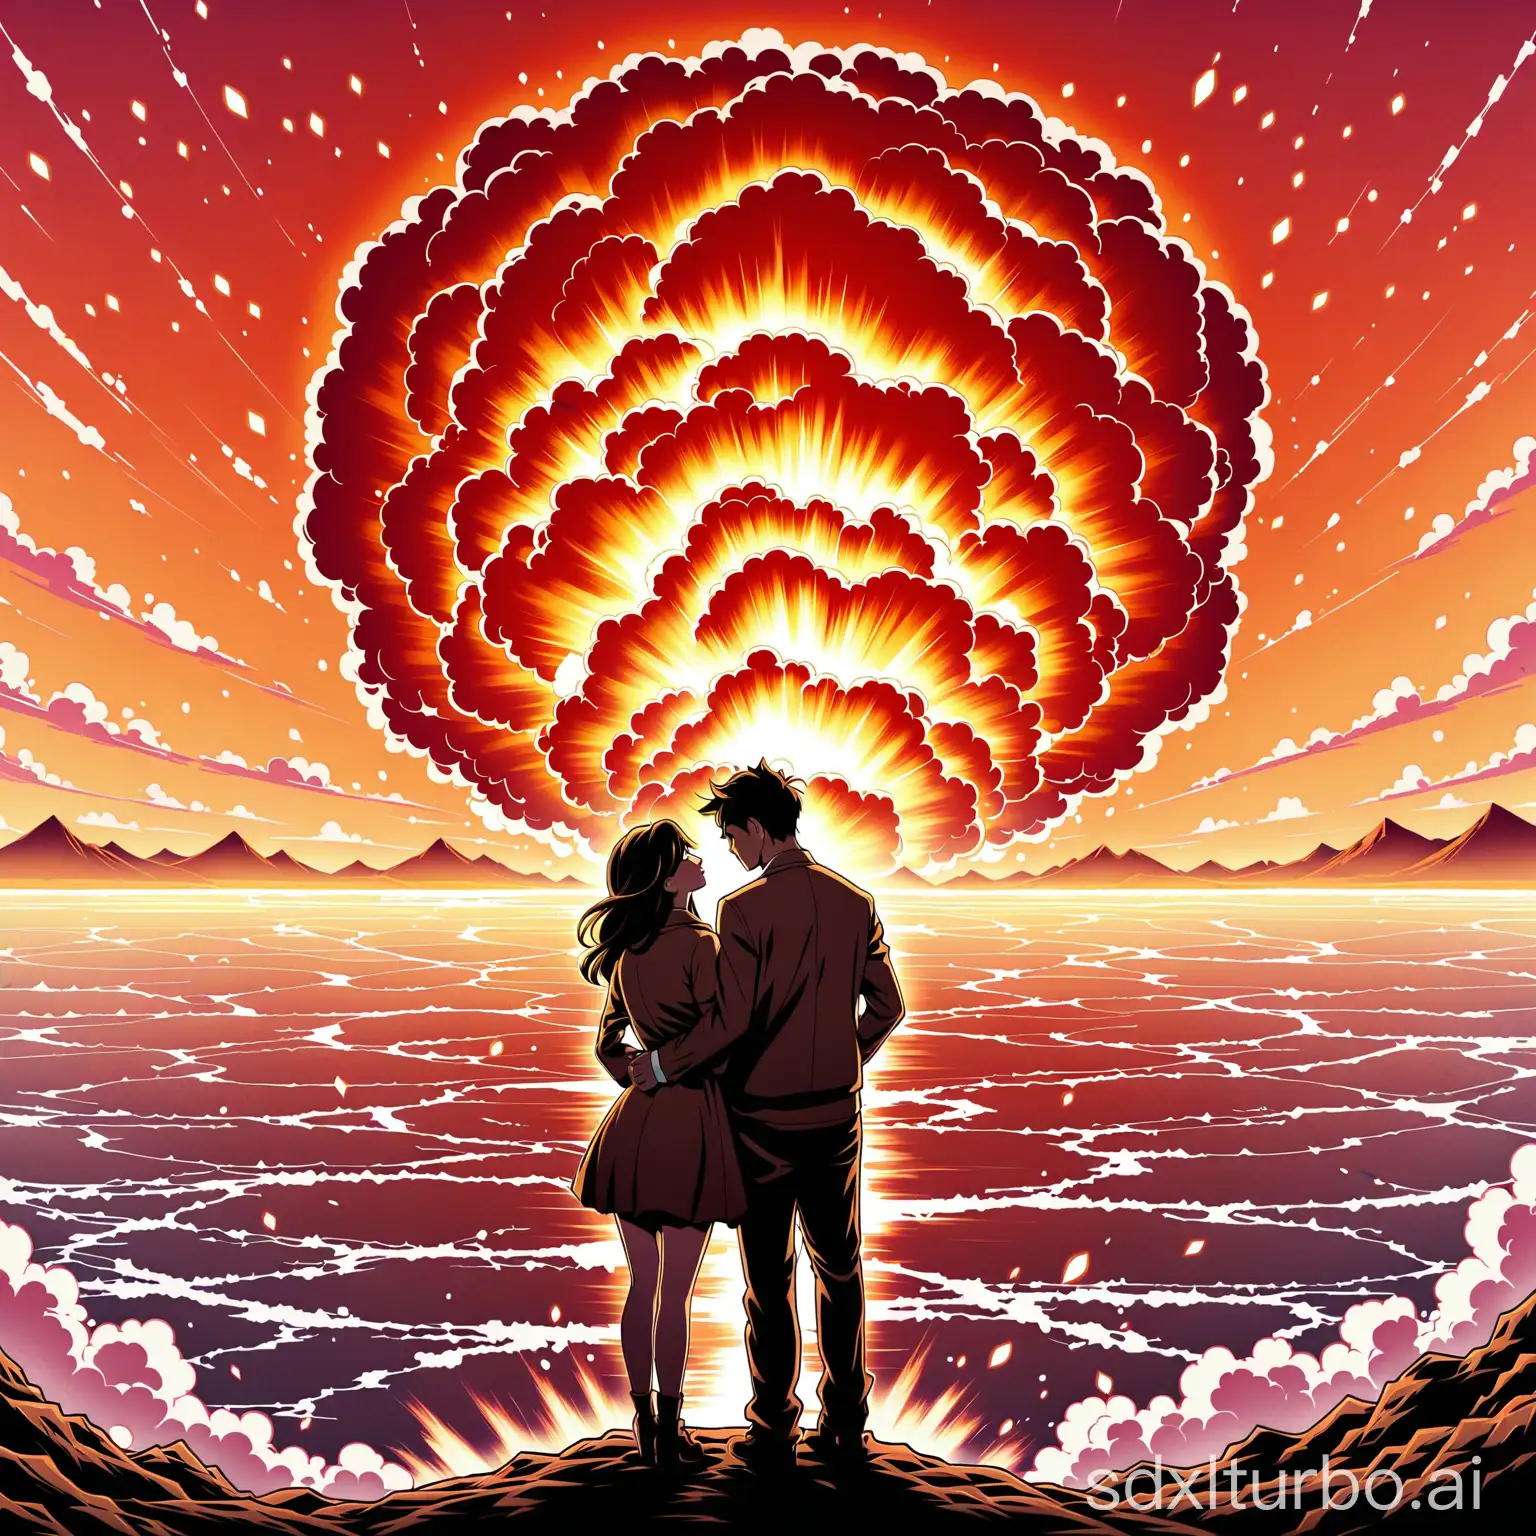 my love is as big as an atomic bomb explosion